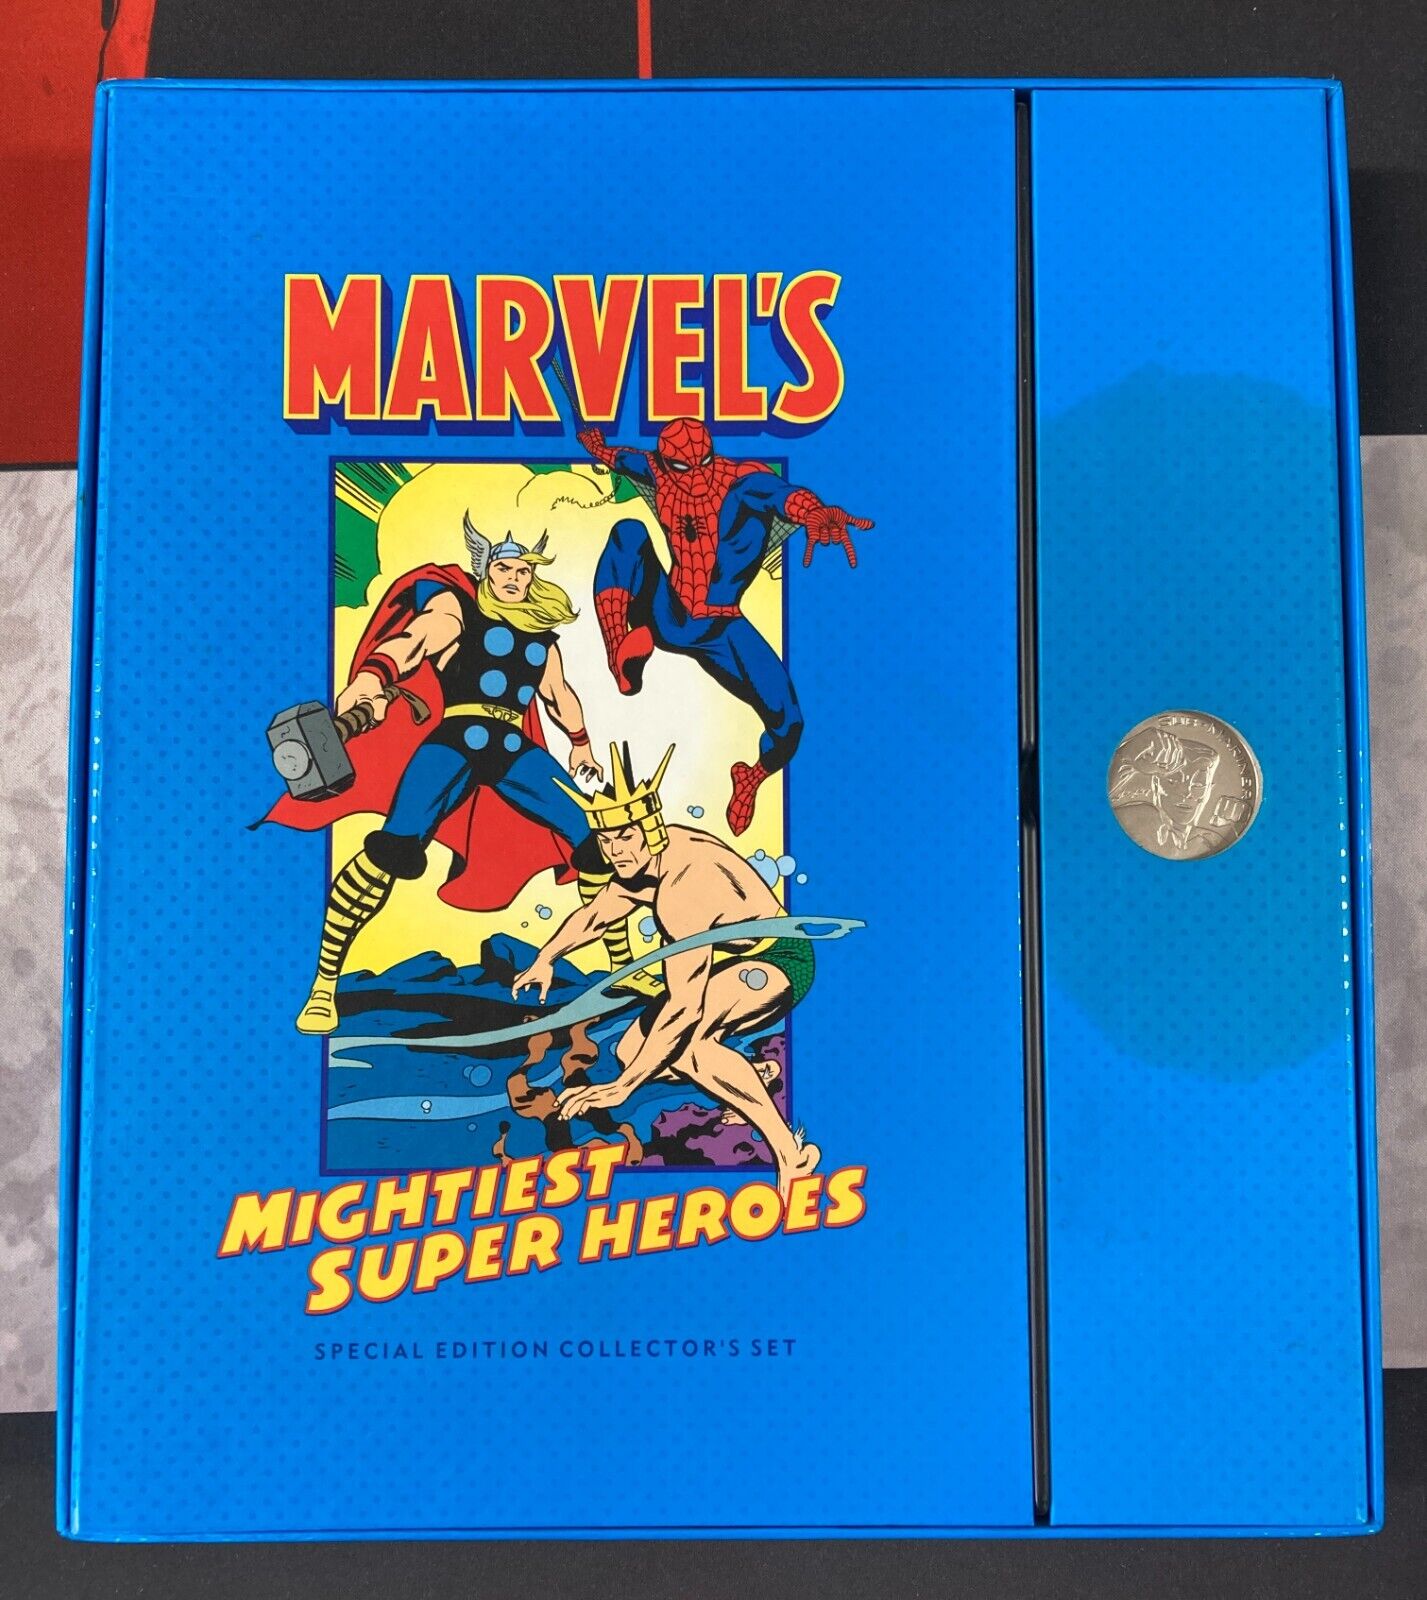 Marvel's Mightiest Superheroes VHS Special Edition Collector's Set - 1999